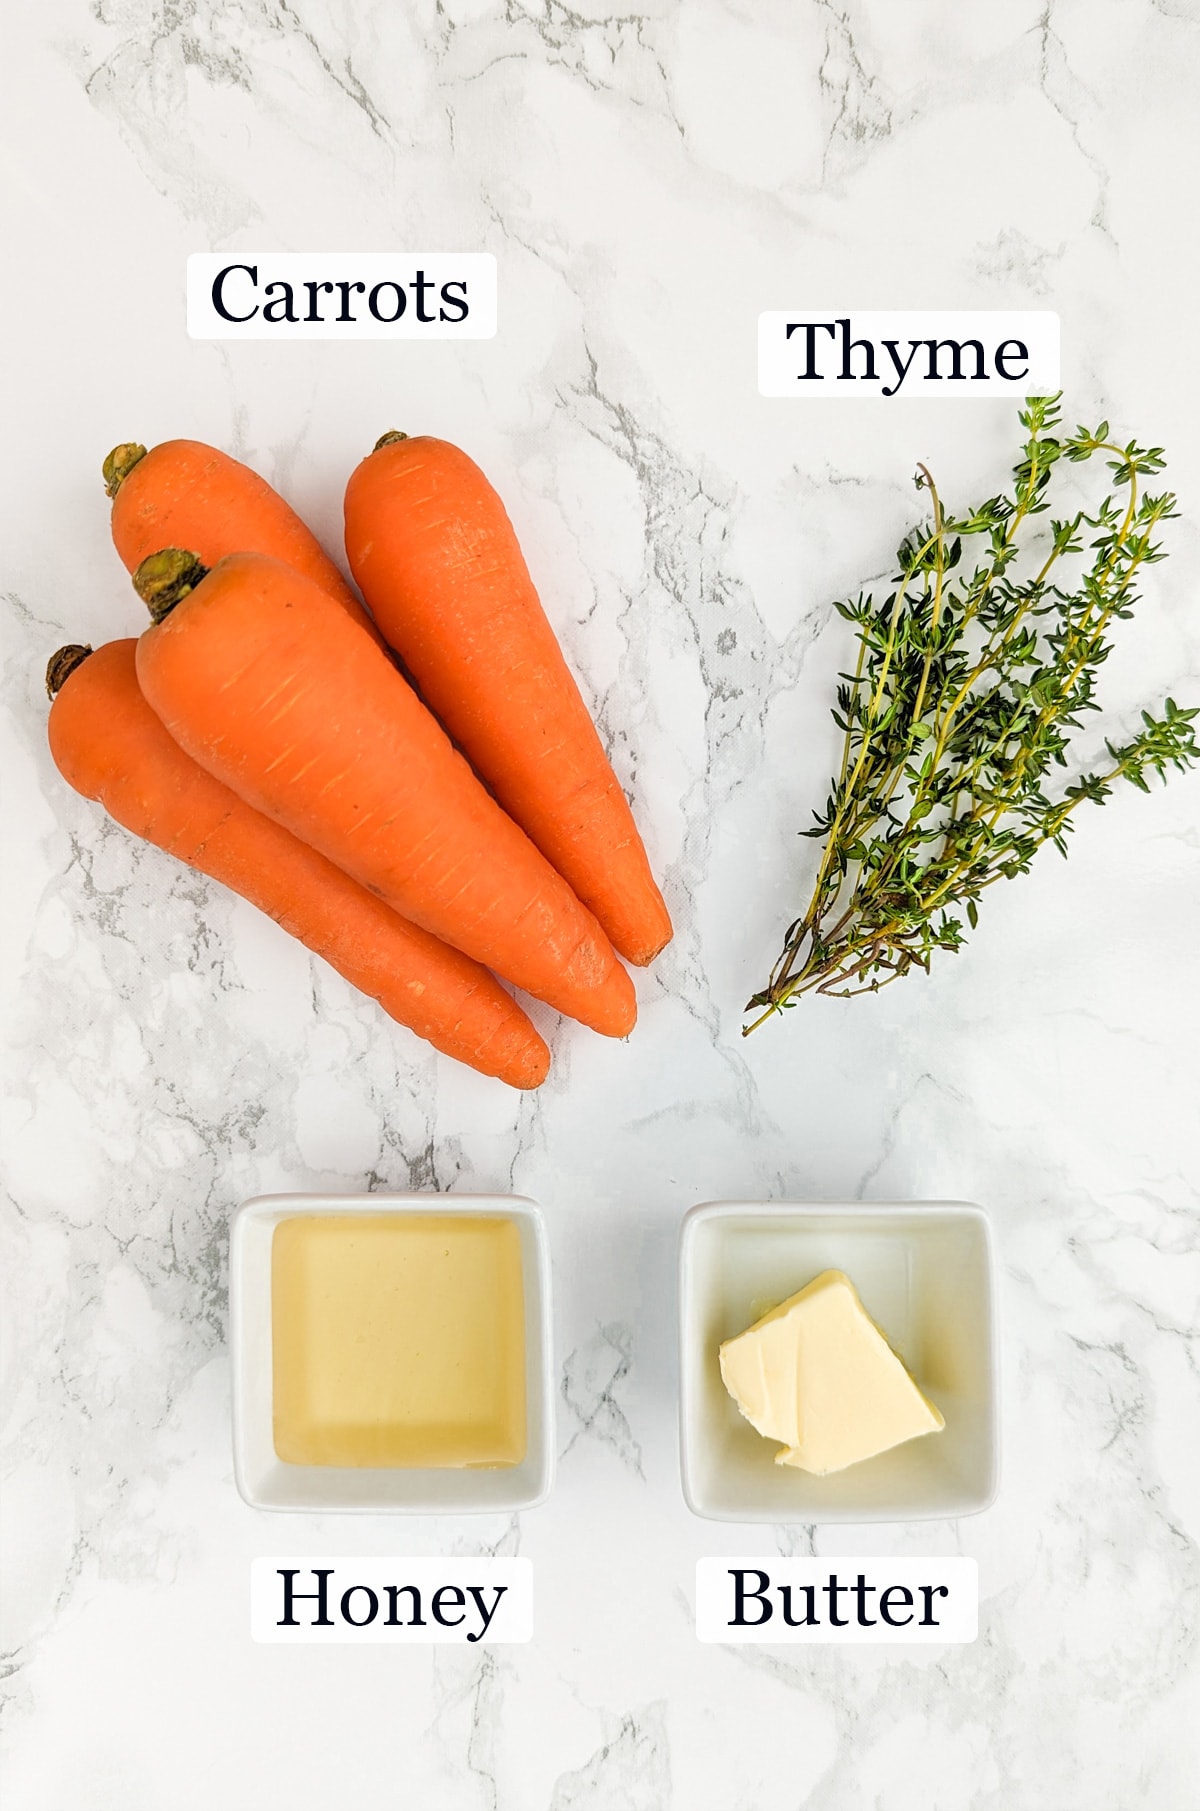 Carrots, thyme, honey, and butter on a white marble table.